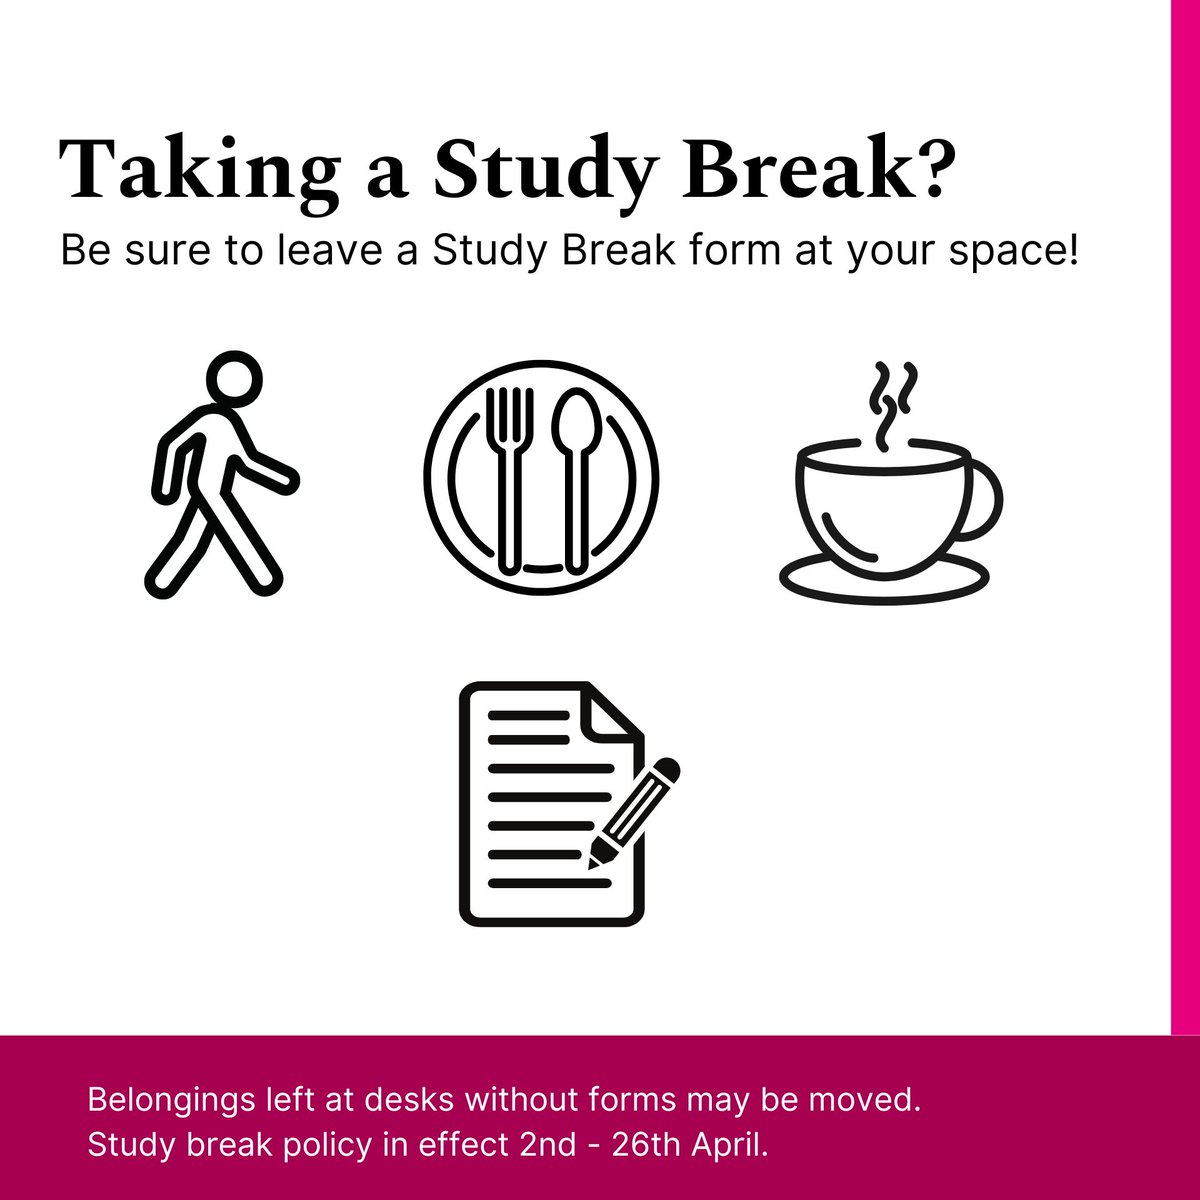 Our study break policy will be in effect again from next week. Forms will be available at the Library entrance. Good luck studying for your exams! And as always, remember to bring your ID card in order to access the Library.